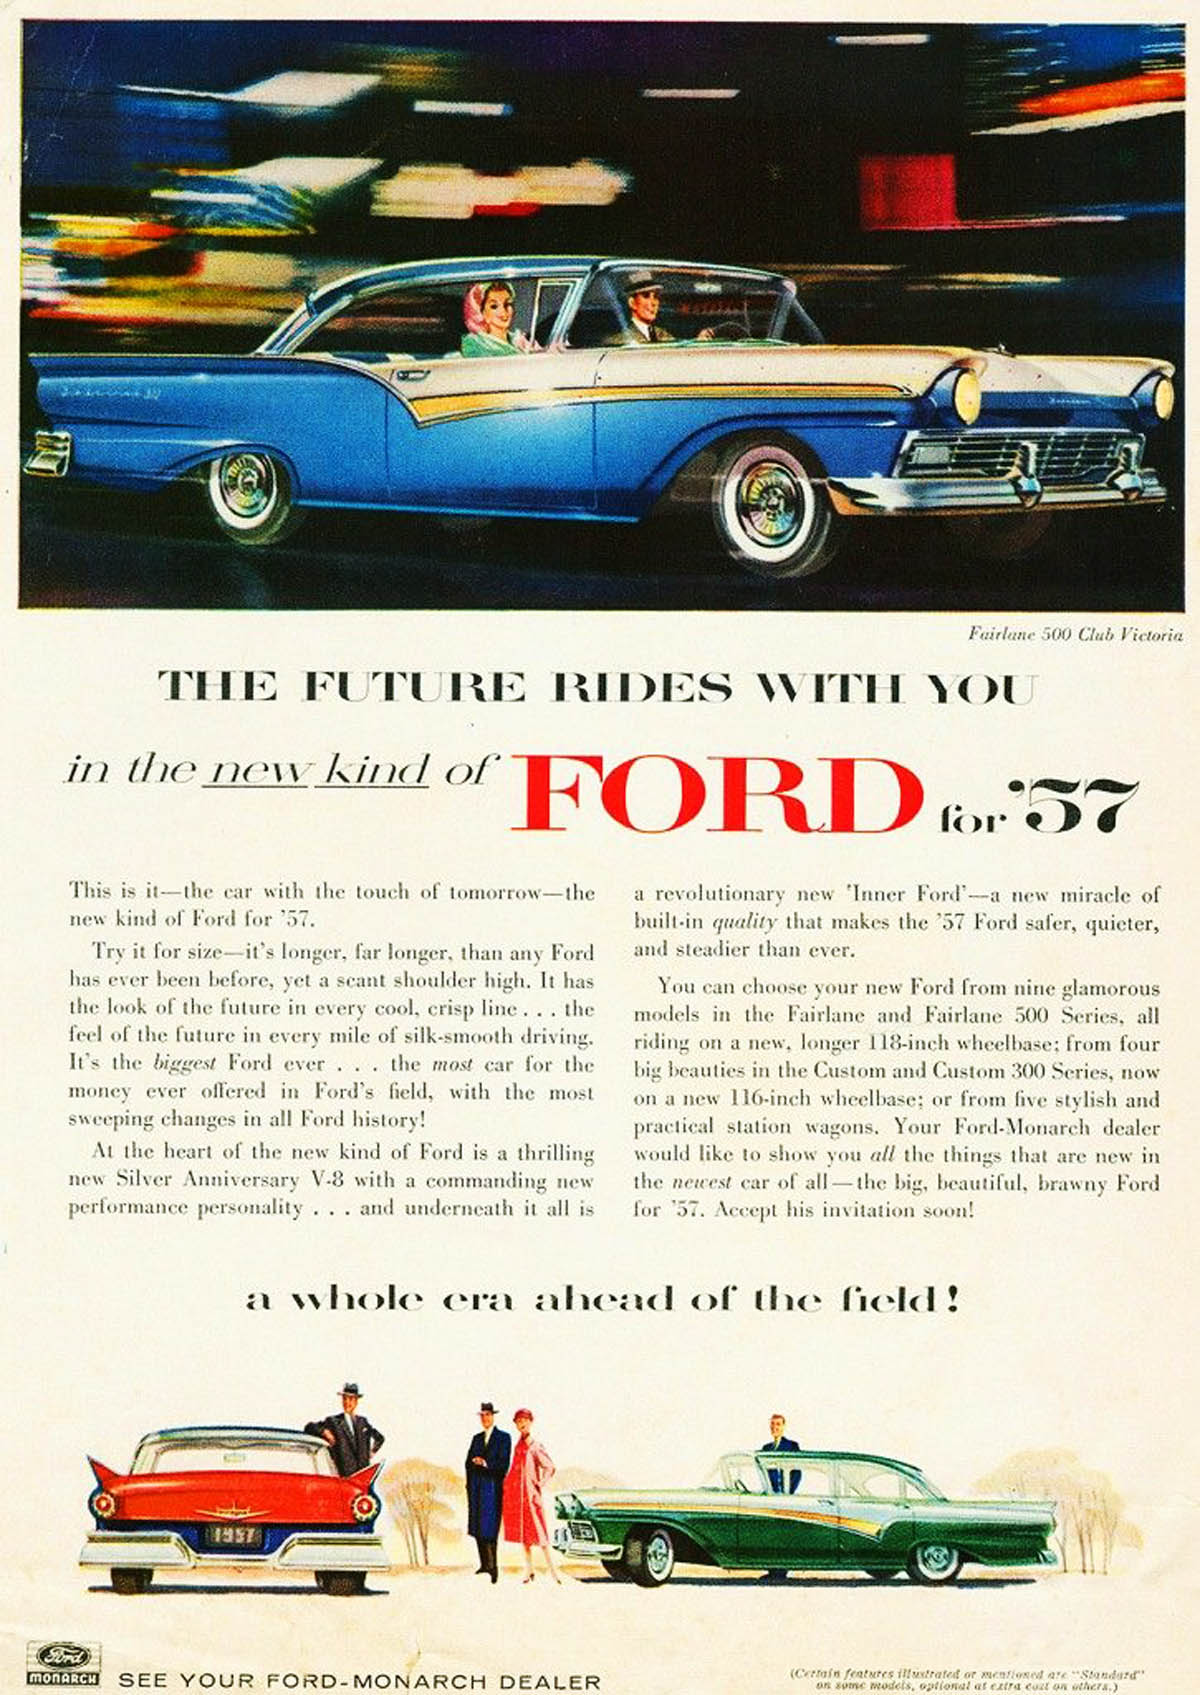 1957 Ford Ad